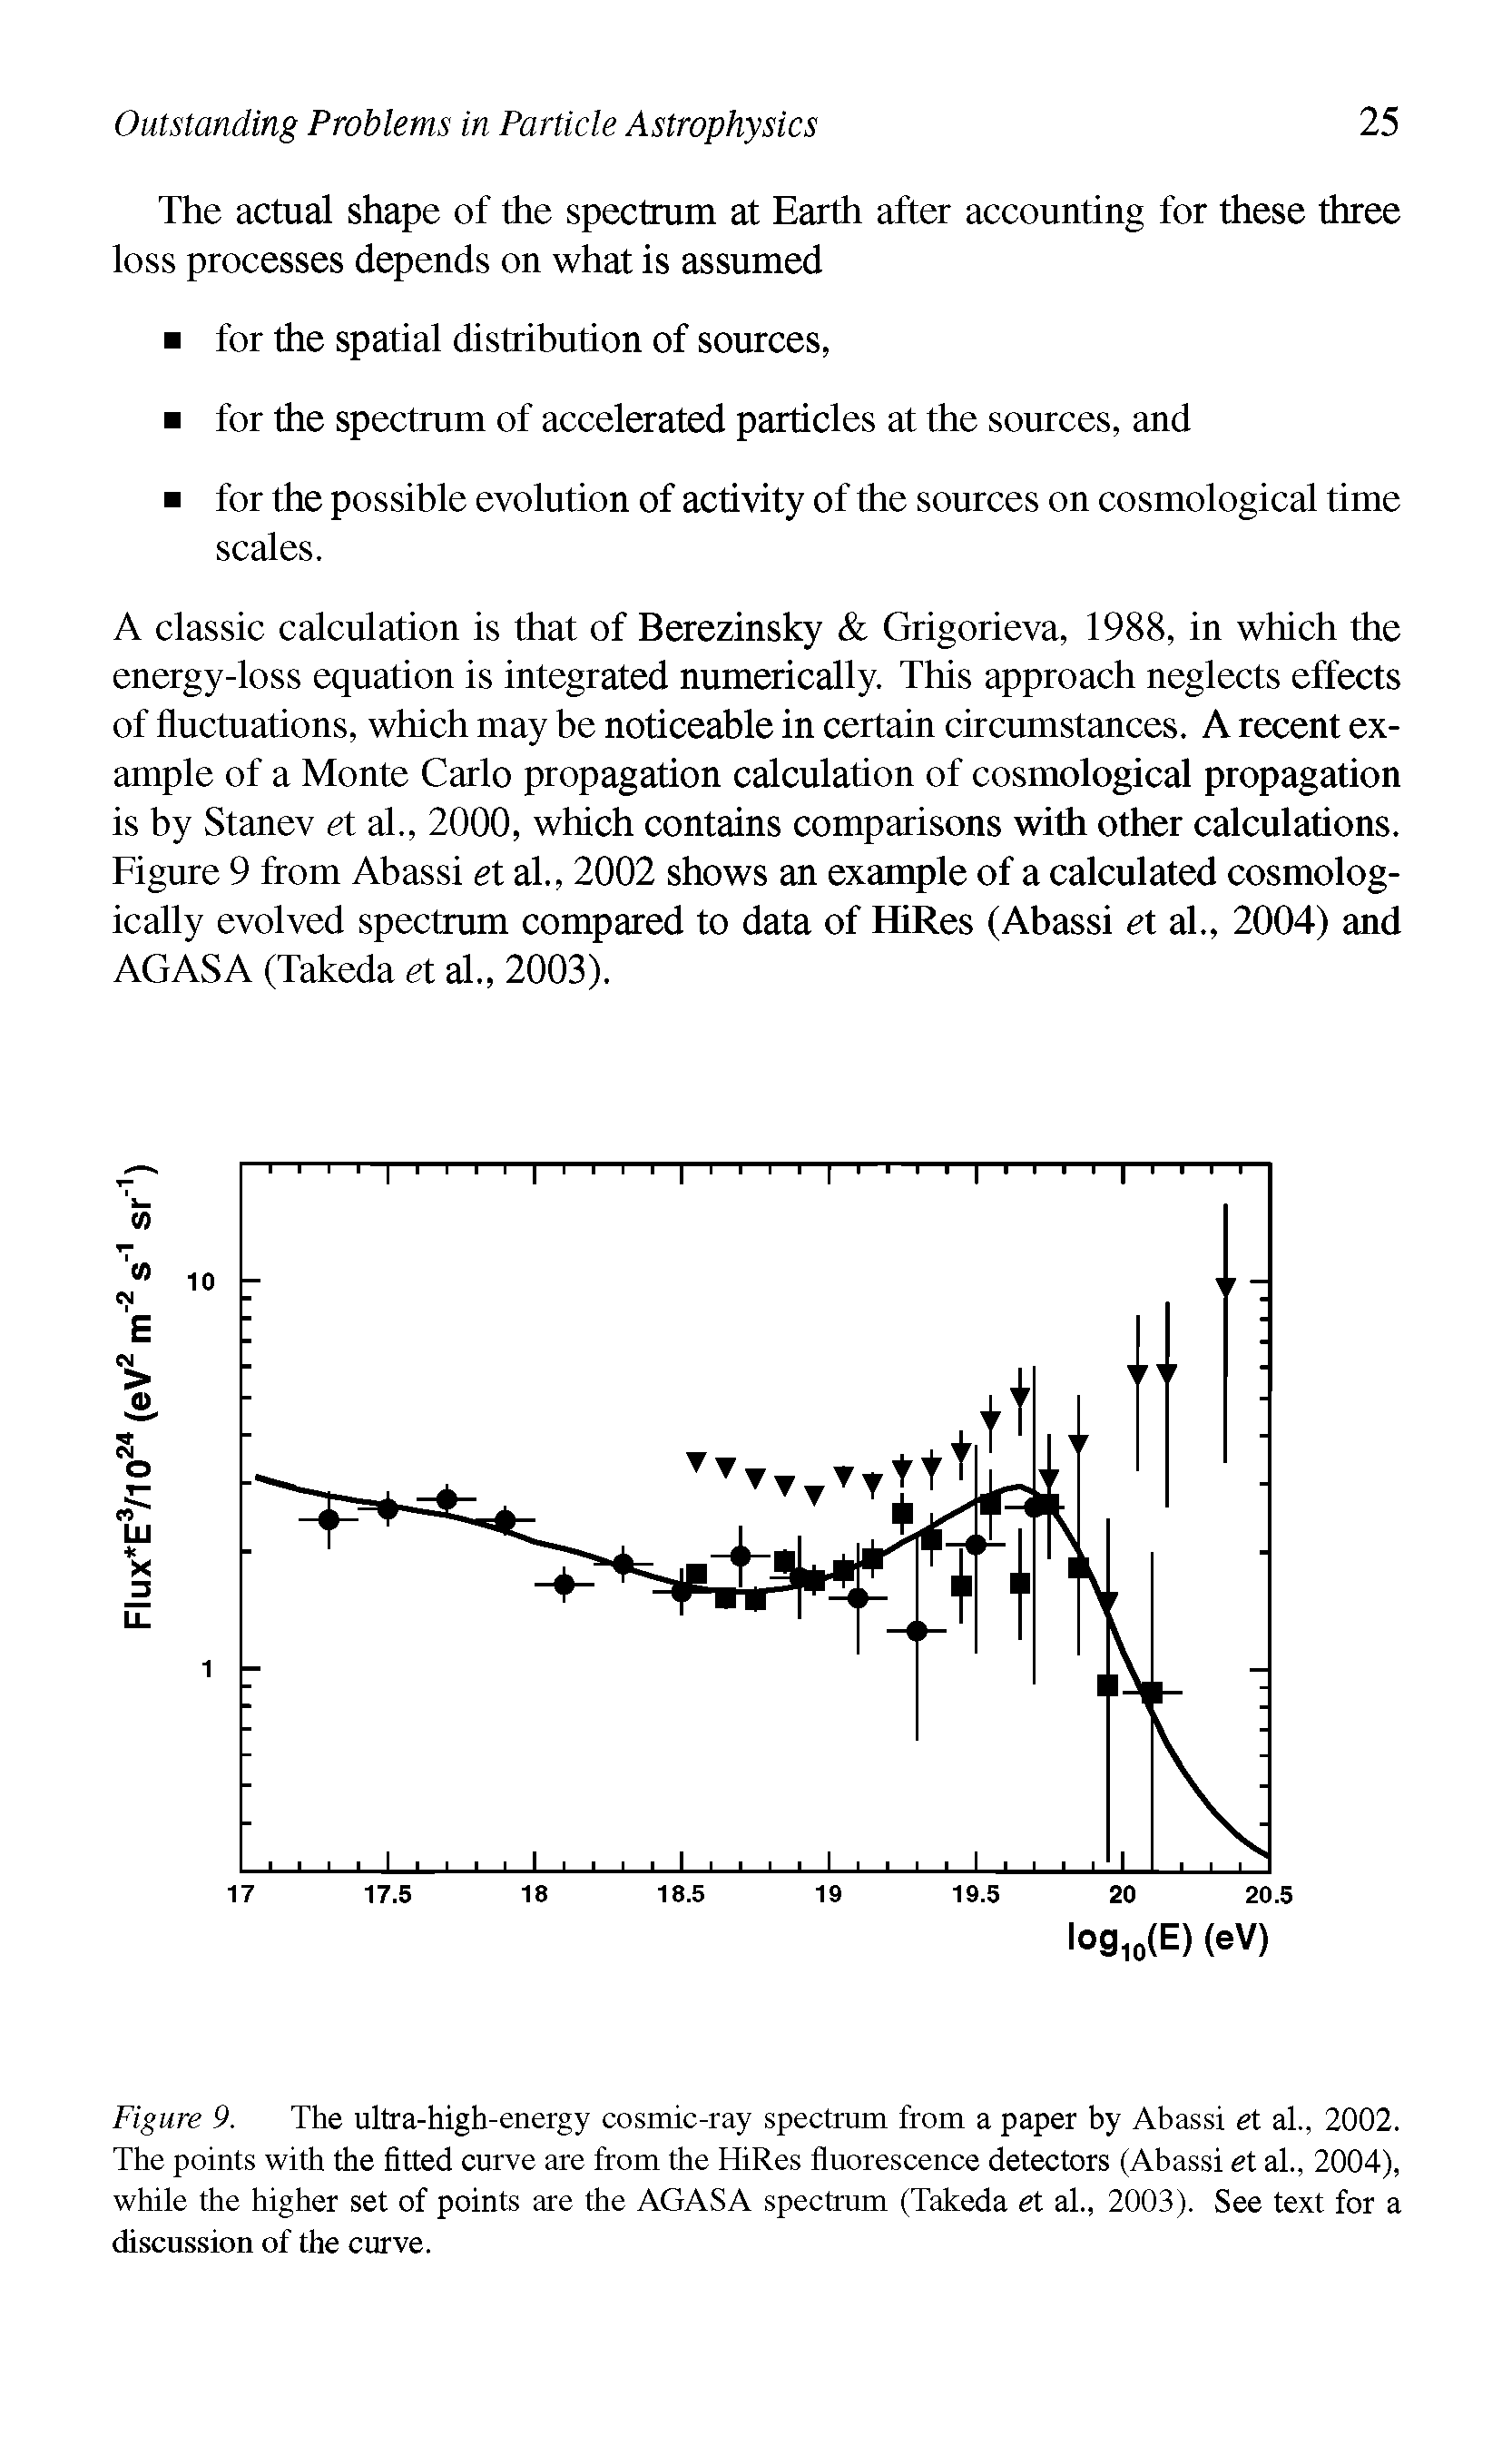 Figure 9. The ultra-high-energy cosmic-ray spectrum from a paper by Abassi et al., 2002. The points with the fitted curve are from the HiRes fluorescence detectors (Abassi et al., 2004), while the higher set of points are the AGASA spectrum (Takeda et al., 2003). See text for a discussion of the curve.